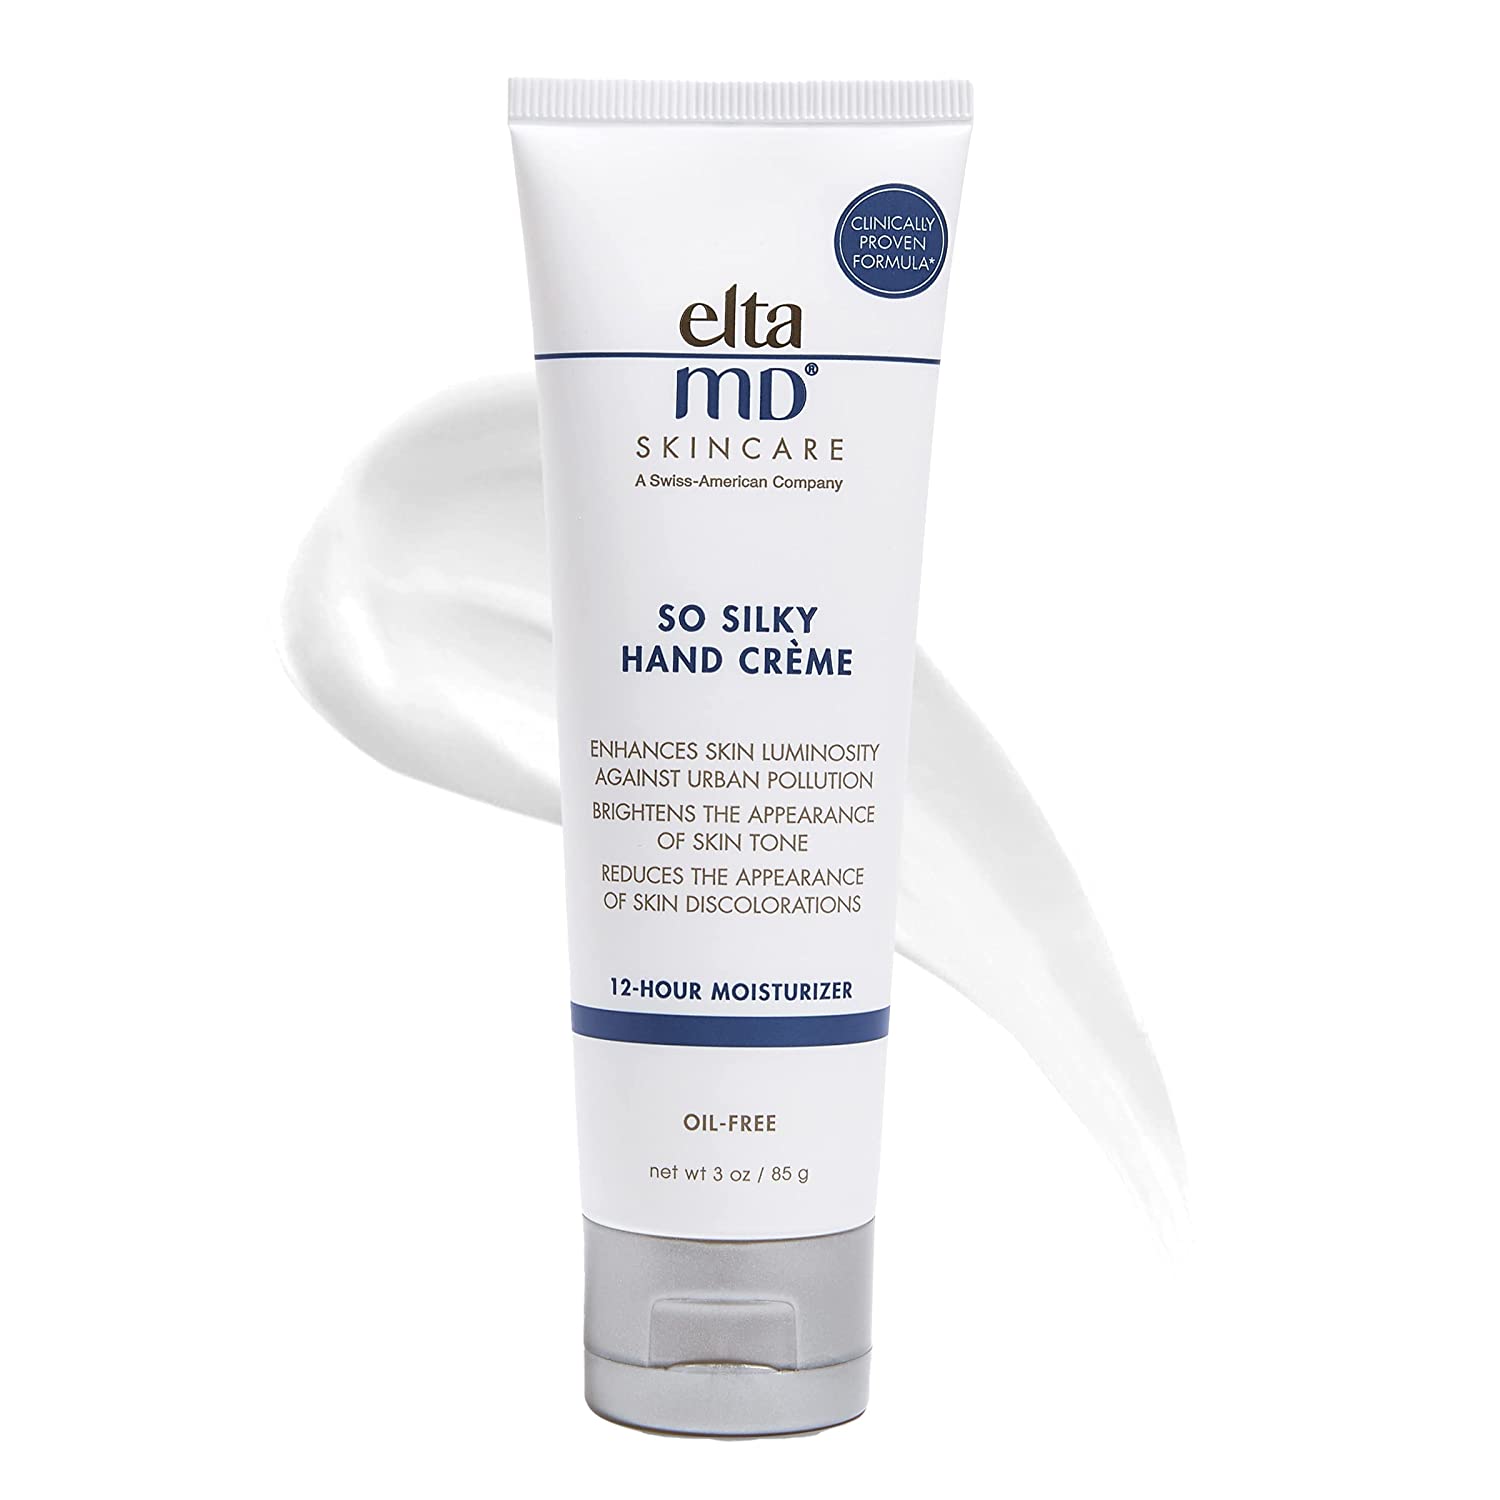 elta MD so silky hand cream tube with product swatch behind it